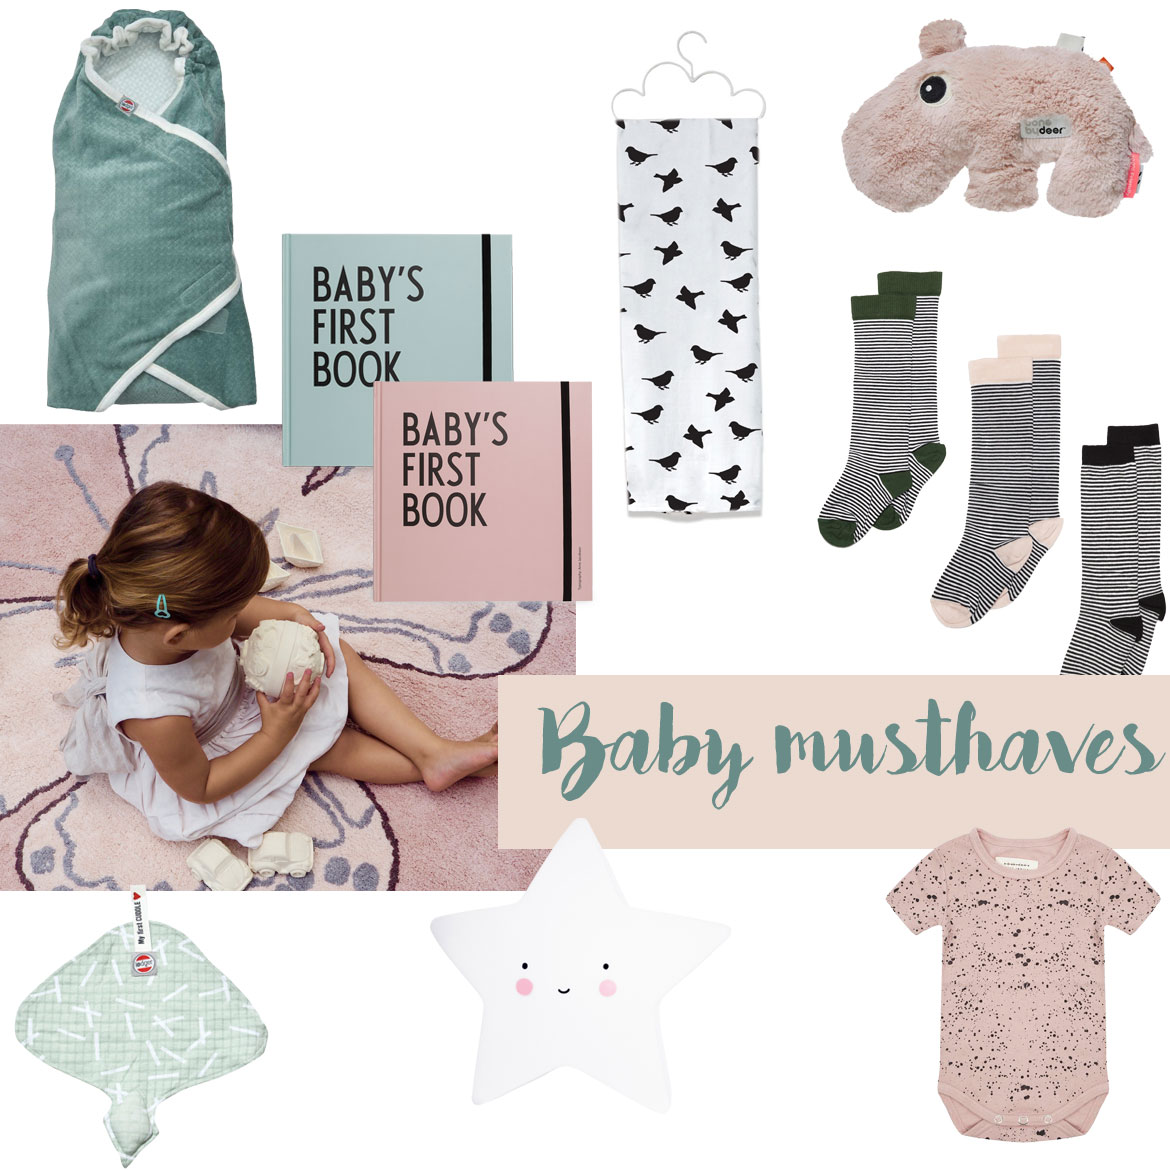 Baby must haves